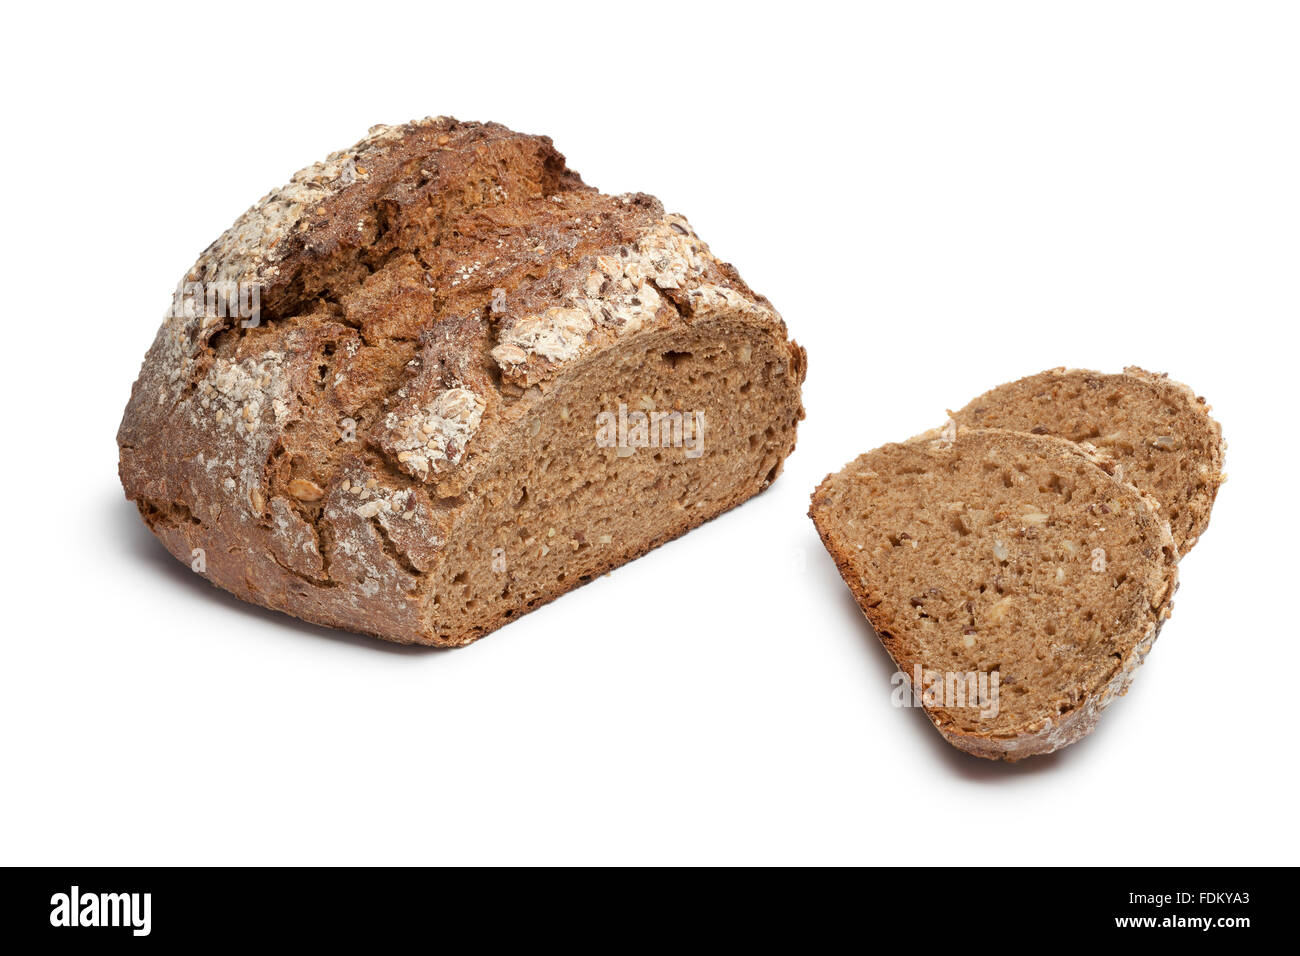 Multi grain farmers bread with slices on white background Stock Photo